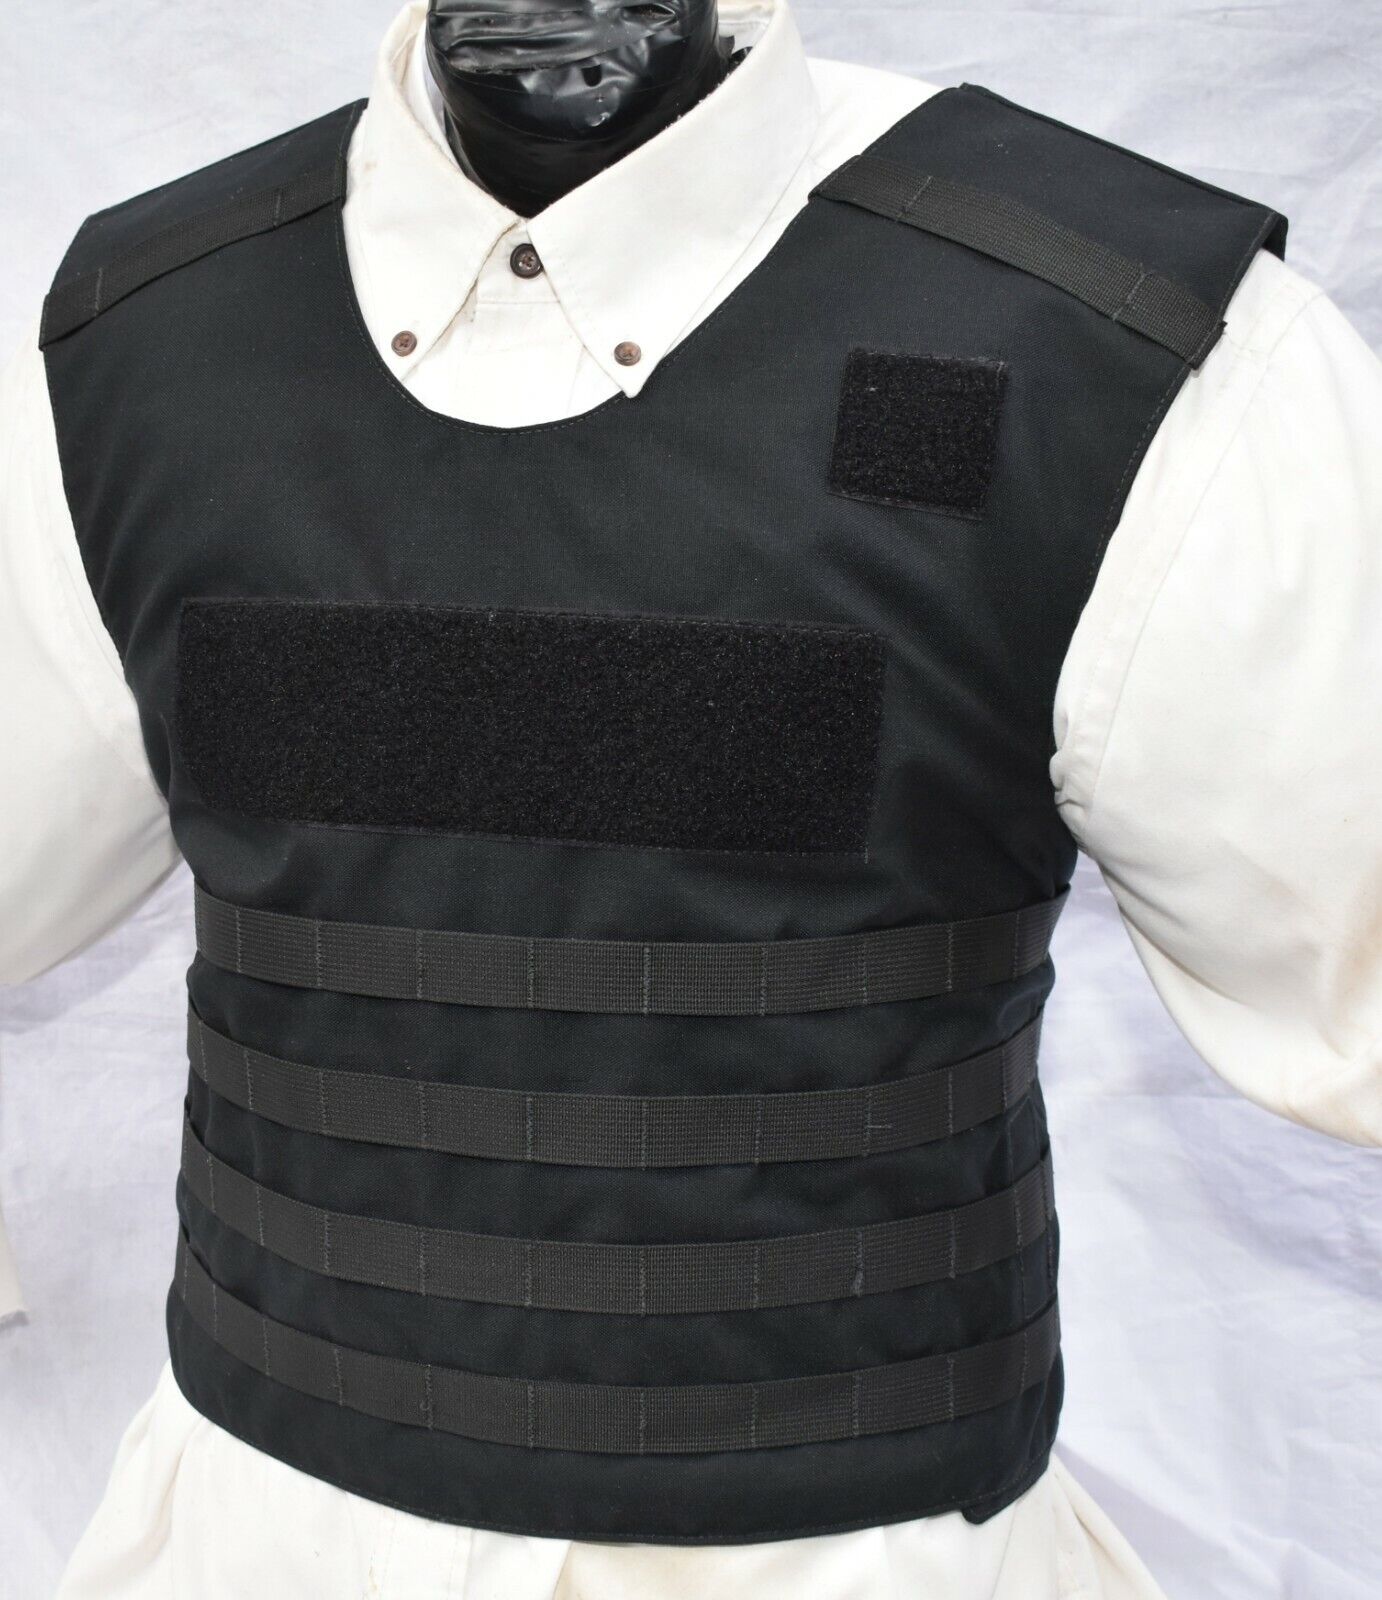 New Med Tactical Carrier w Lvl IIIA Made with Kevlar Body Armor BulletProof Vest